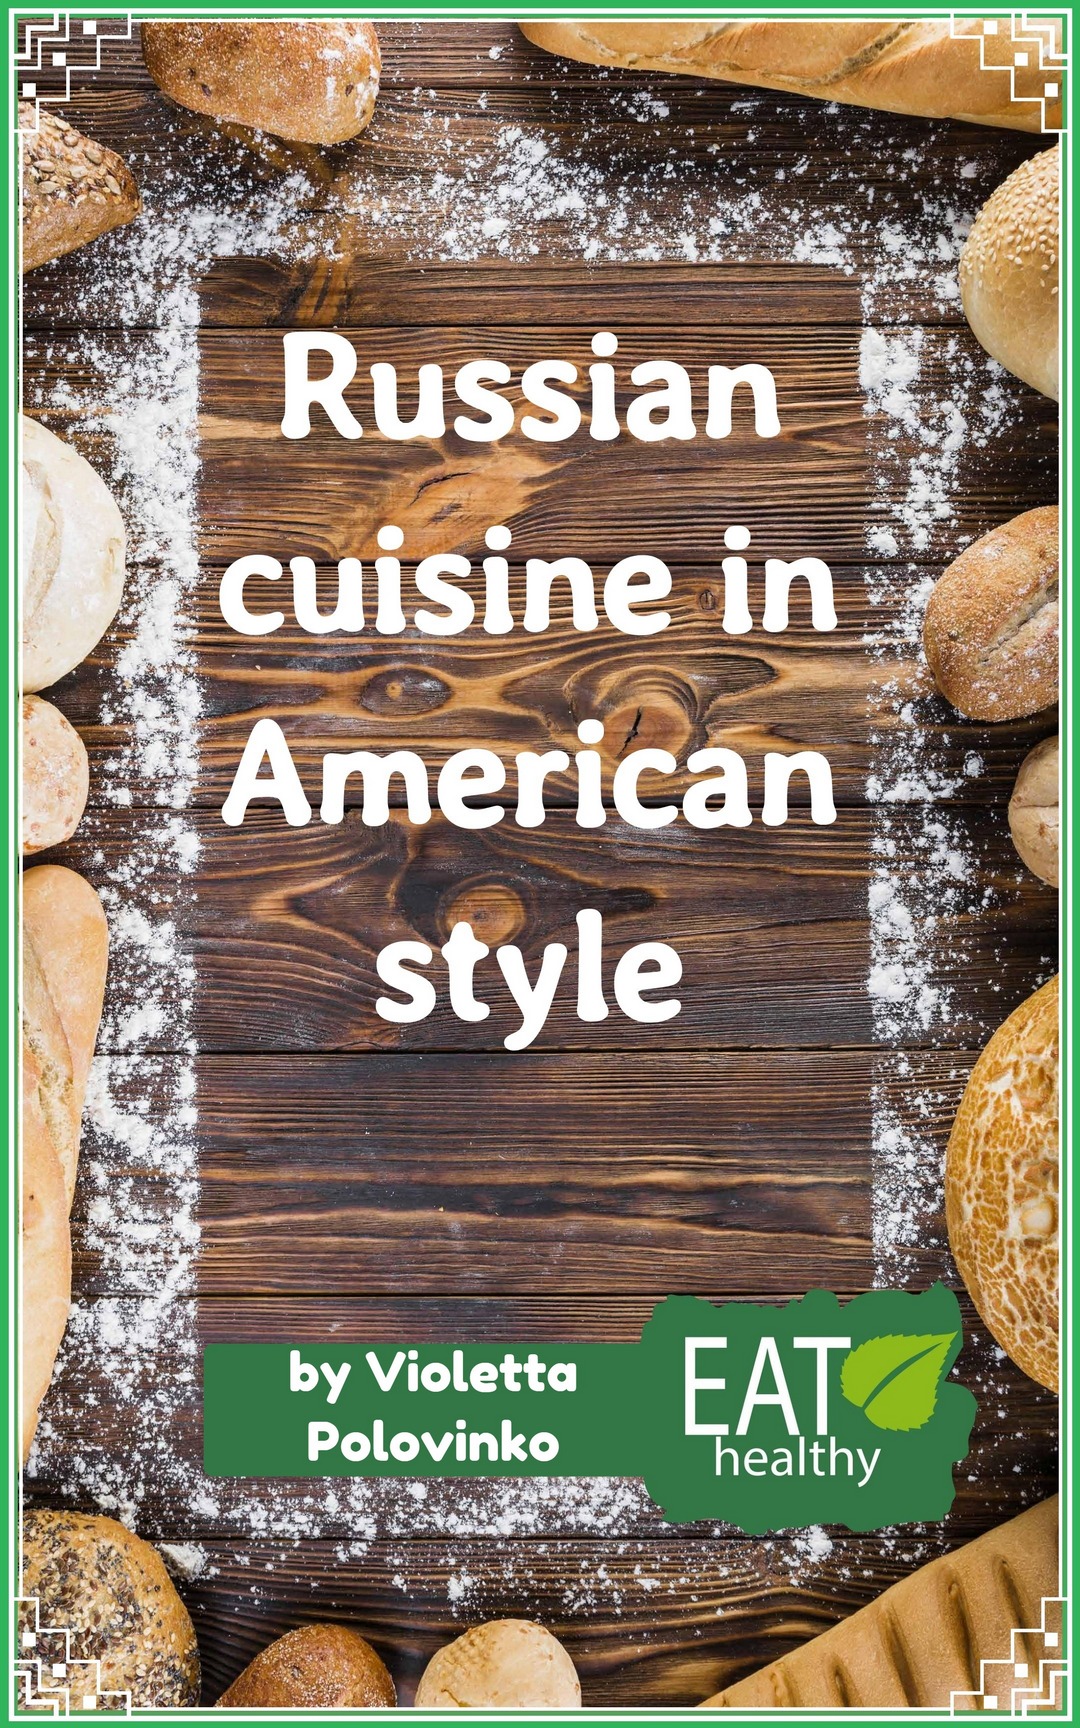 FREE: Russian cuisine in American style by Violetta Polovinko